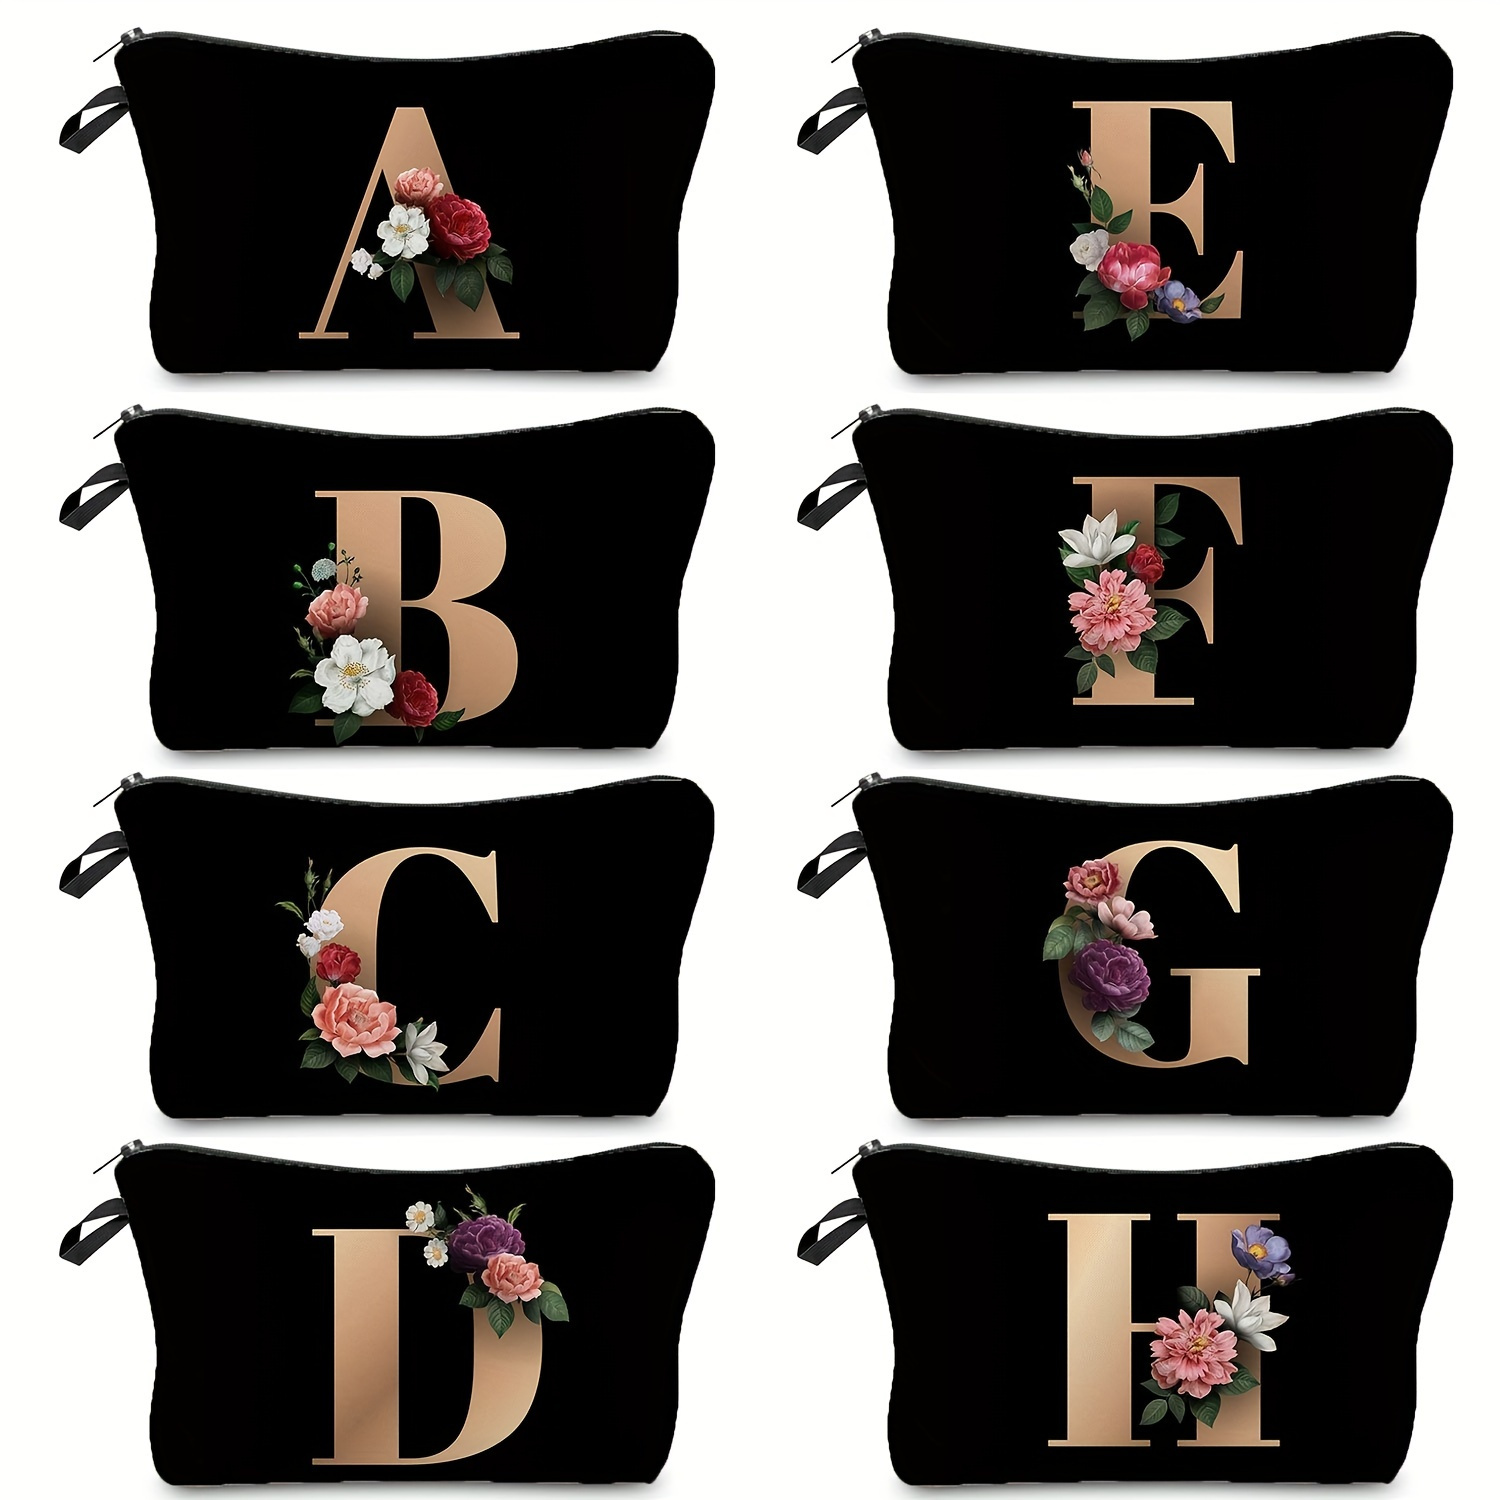 

Flower & Letter Print Cosmetic Bag, Zipper Portable Makeup Pouch, Lightweight Coin Purse Gift For Women's Day